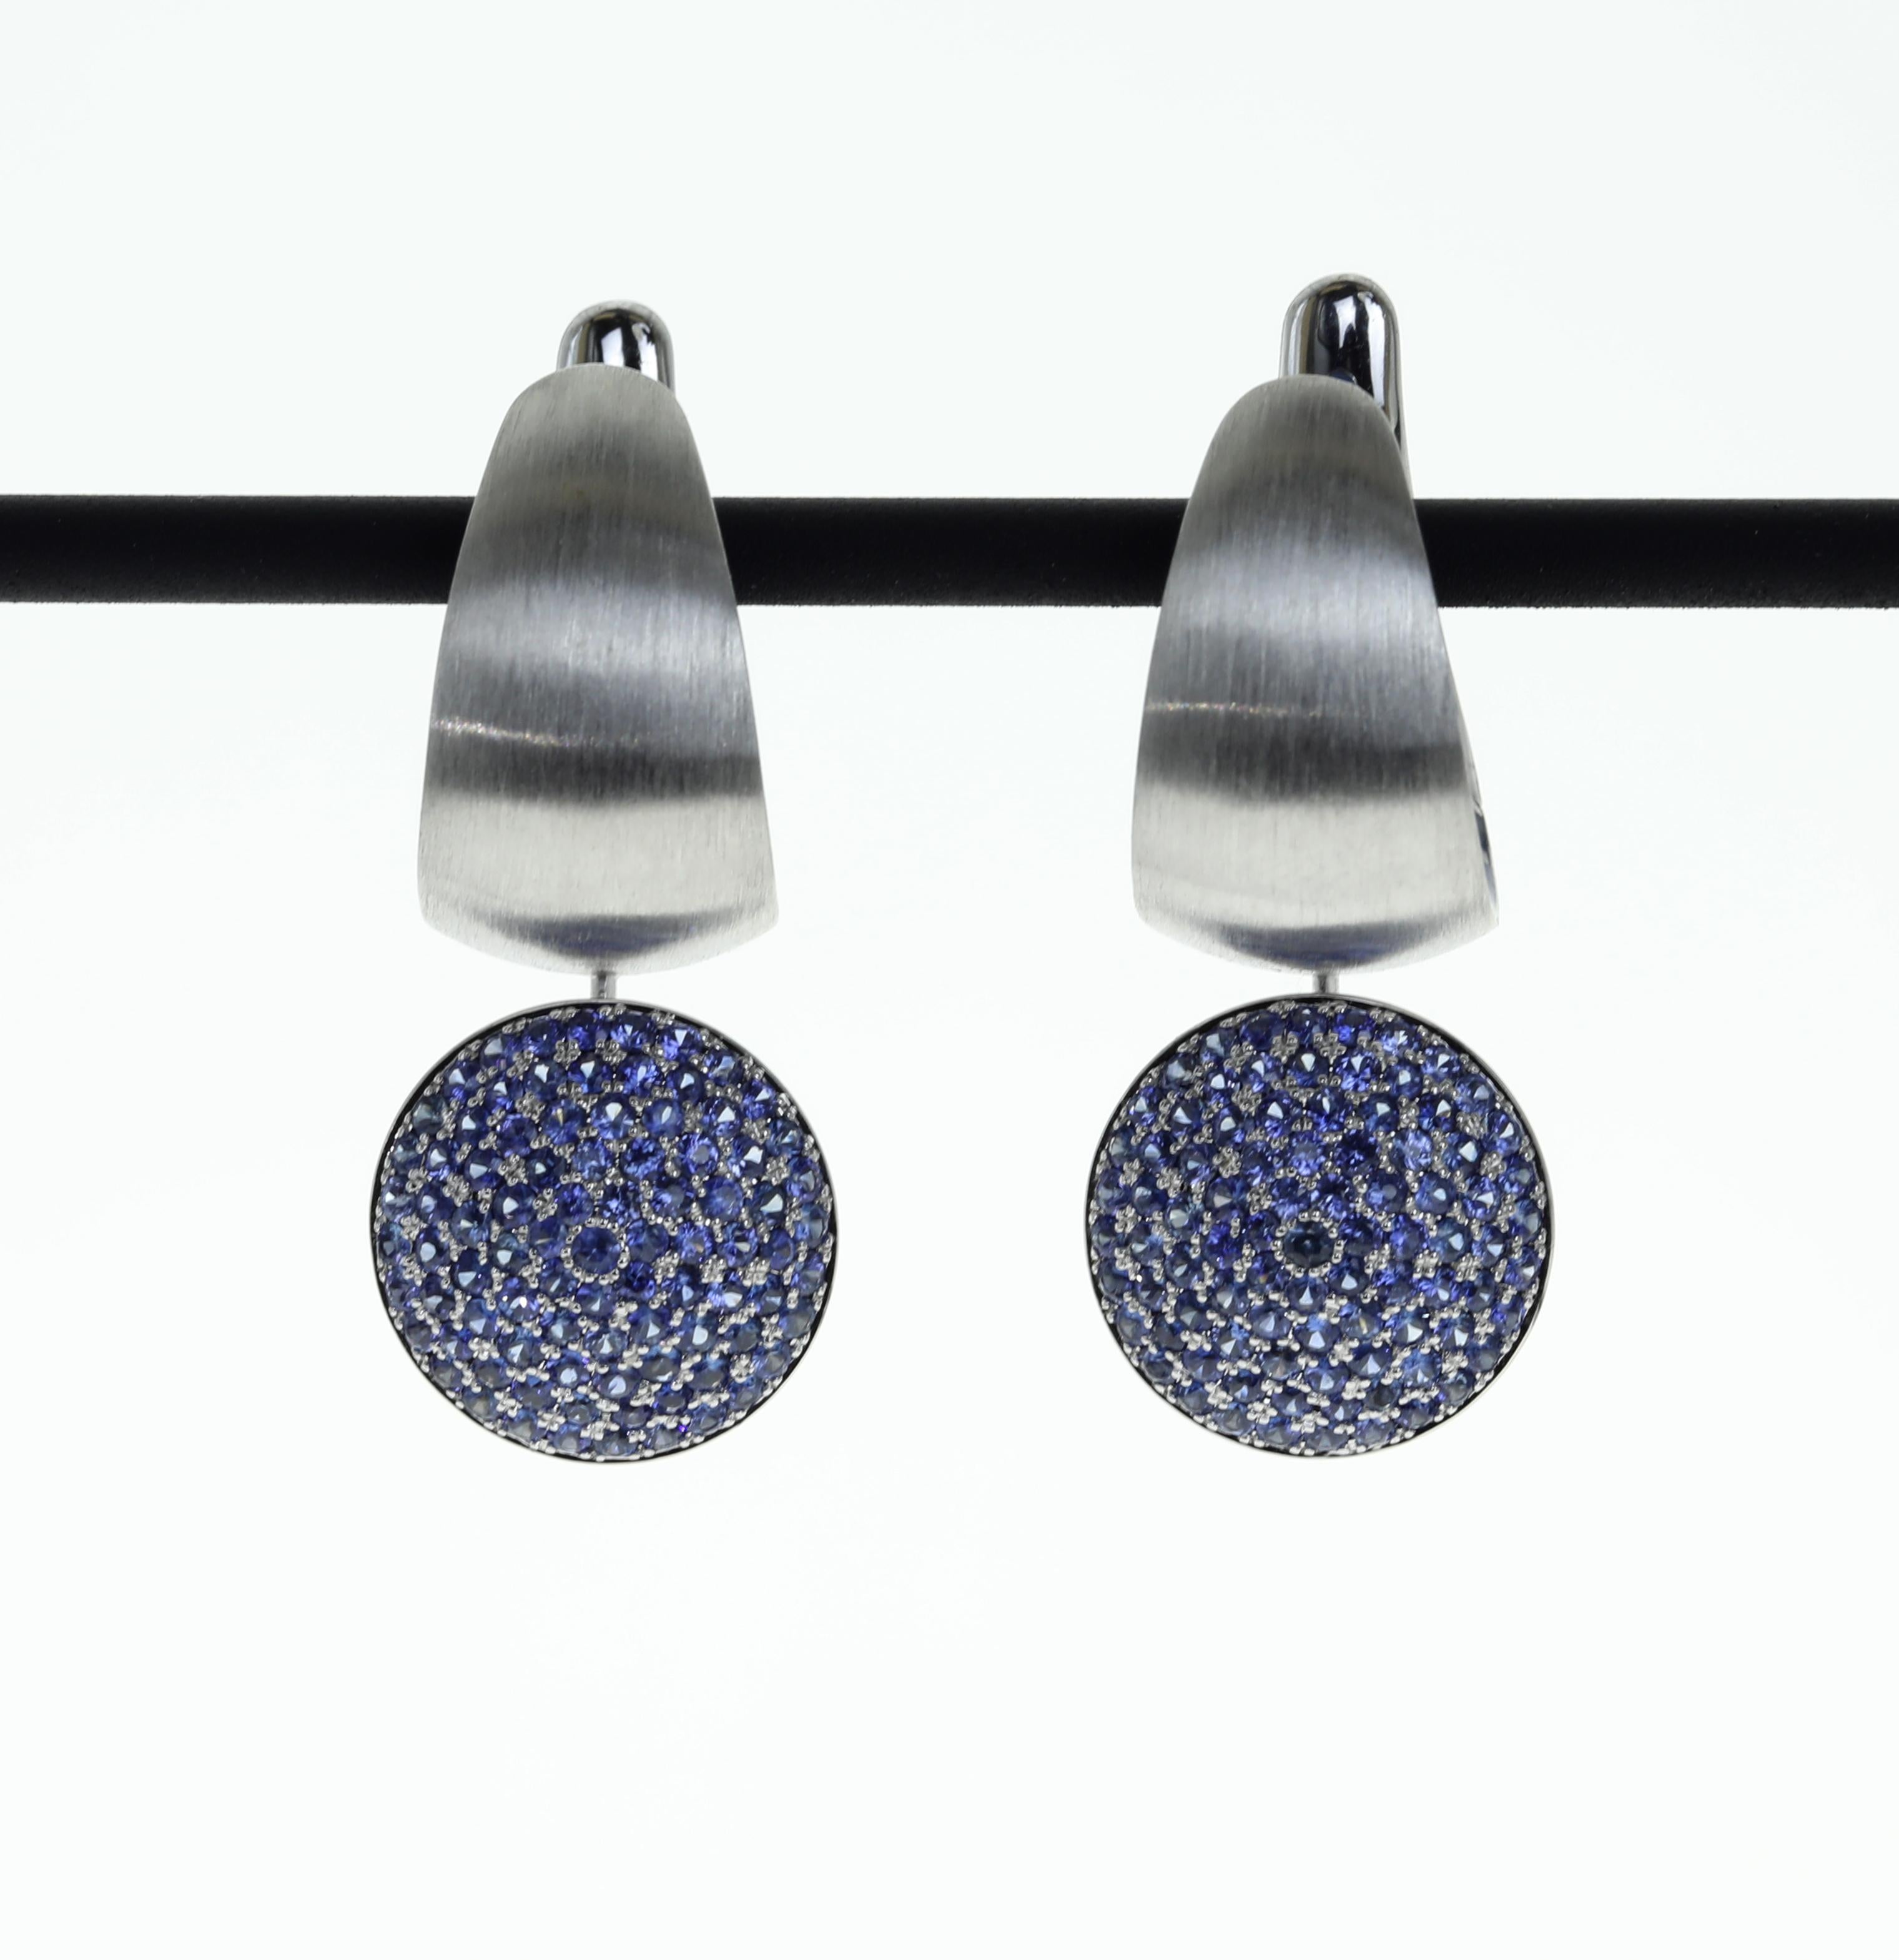 Blue Sapphire Enamel 18 Karat White Gold Kaleidoscope Earrings
From our Kaleidoscope Collection - Blue Sapphire with Enamel, 18 Karat White Gold Earrings. All outer surfaces are with Silk Finishing. Enamel inside gives these Earrings some hidden